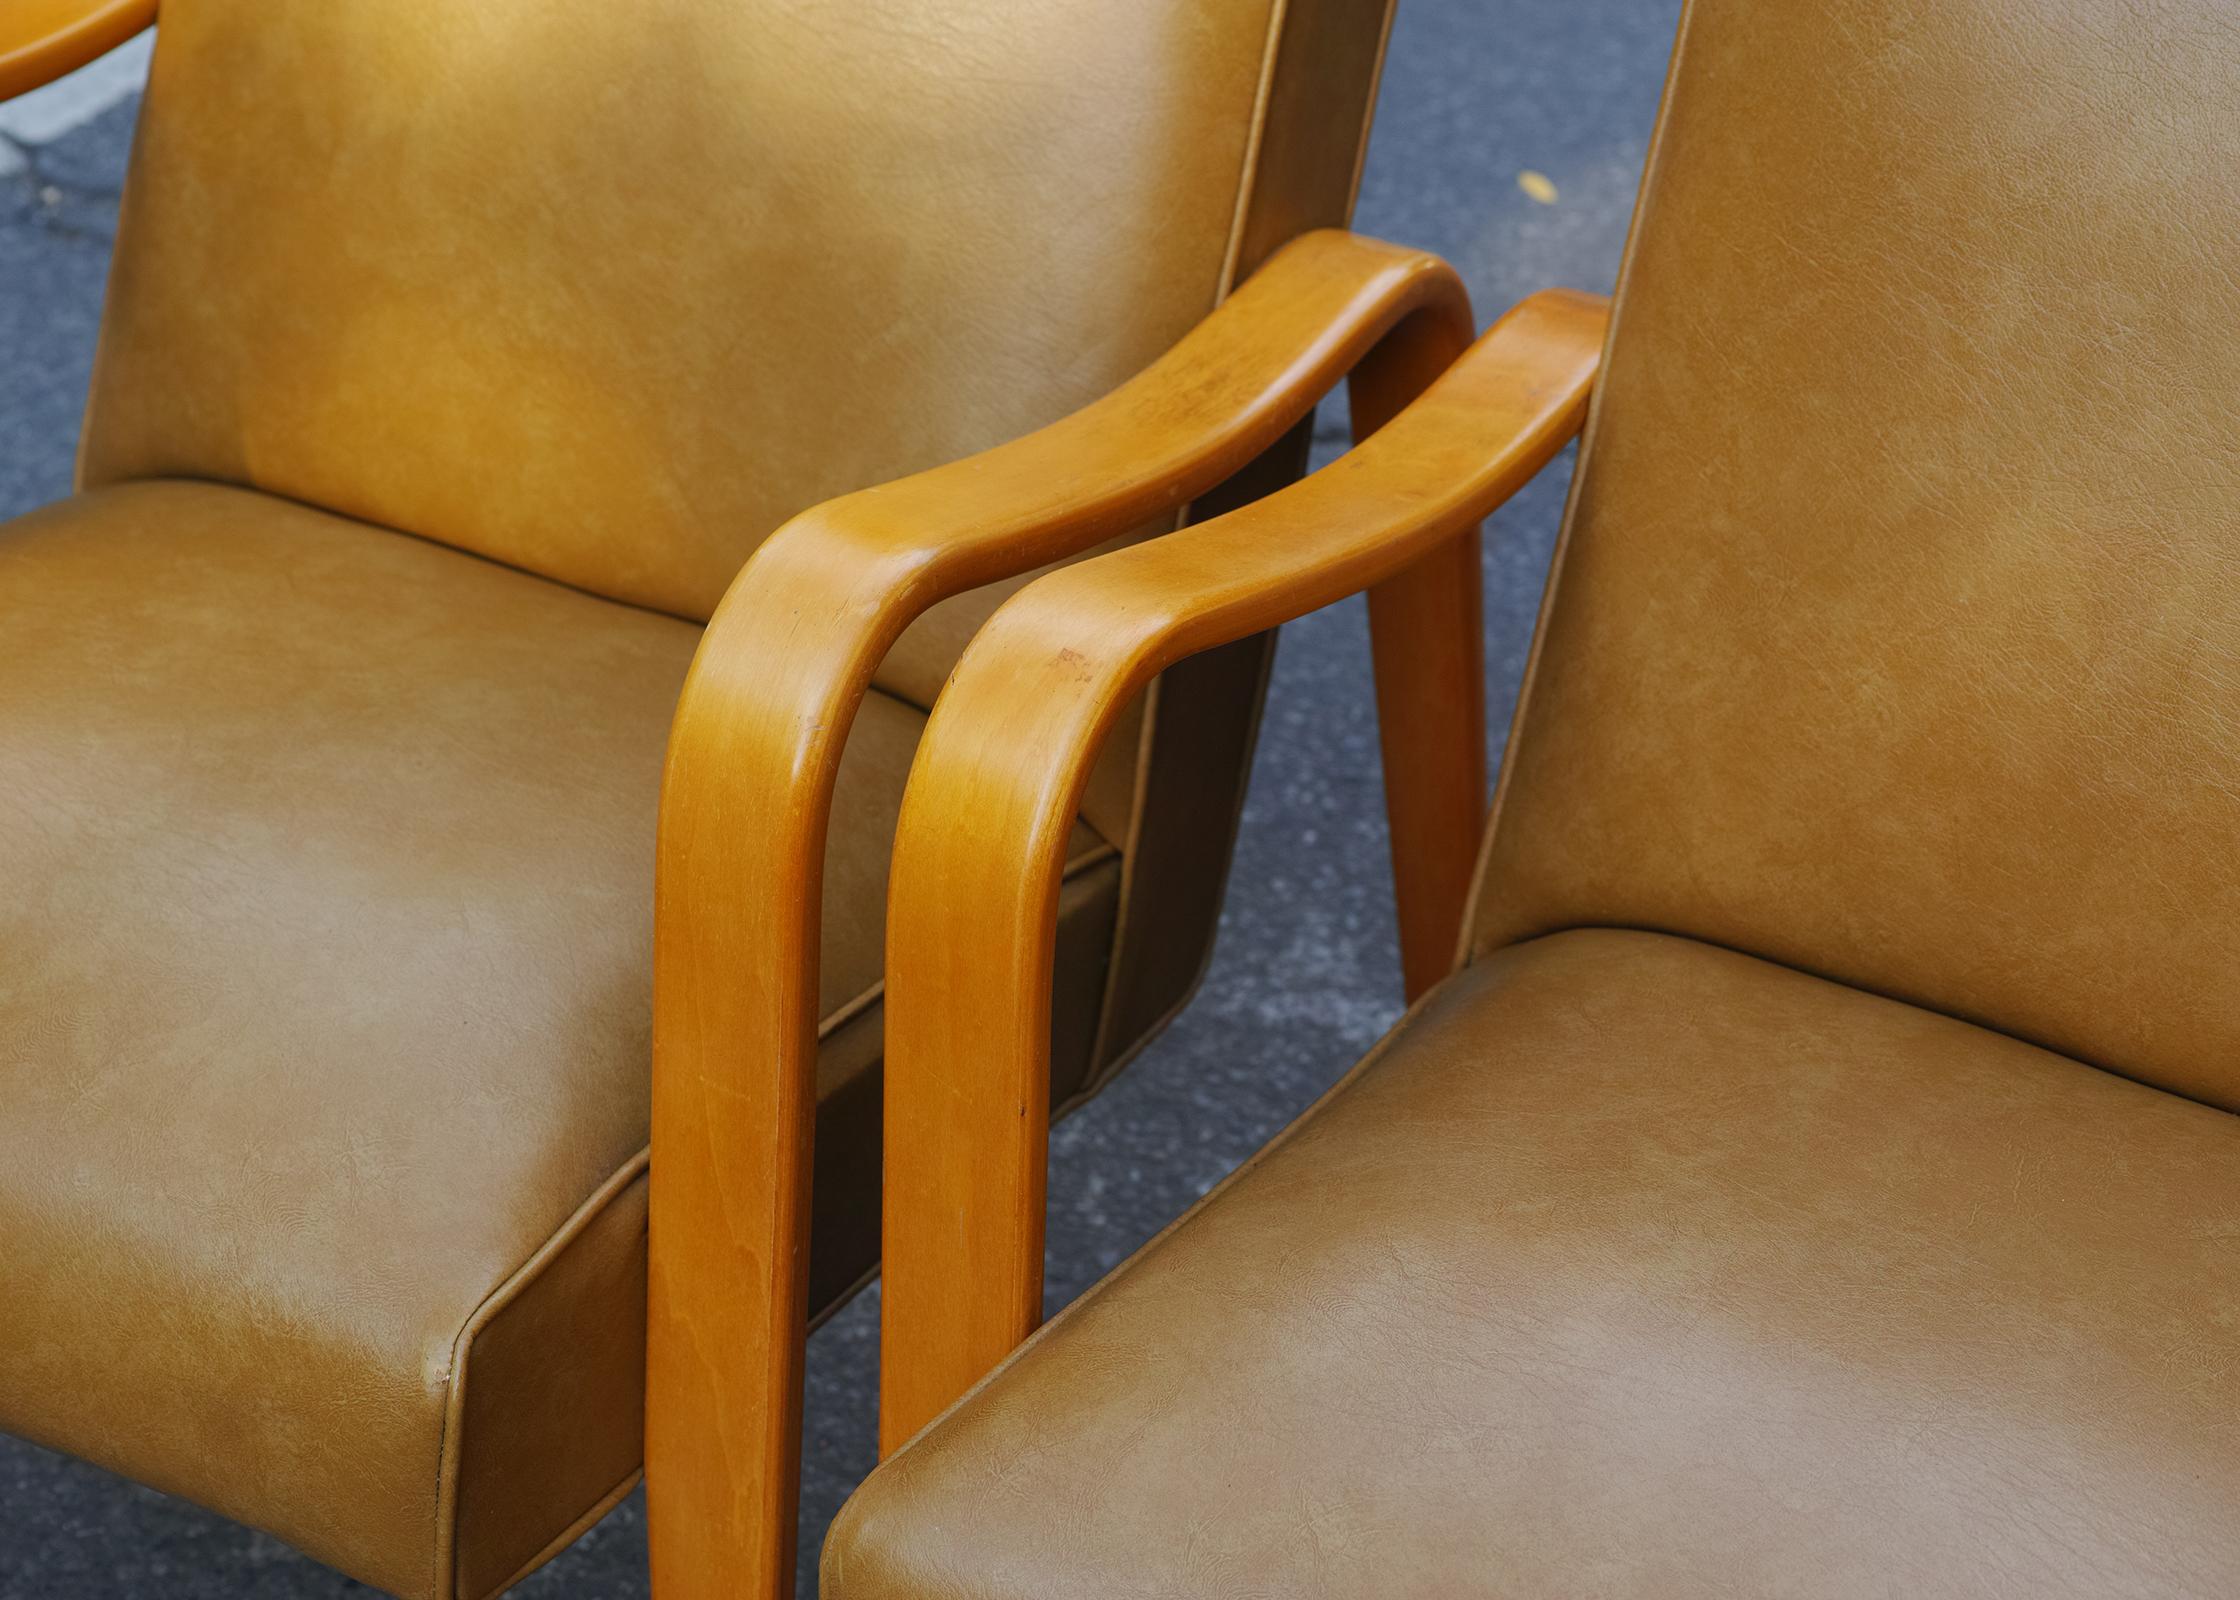 Mid-20th Century Pair of Thonet Lounge Chairs For Sale